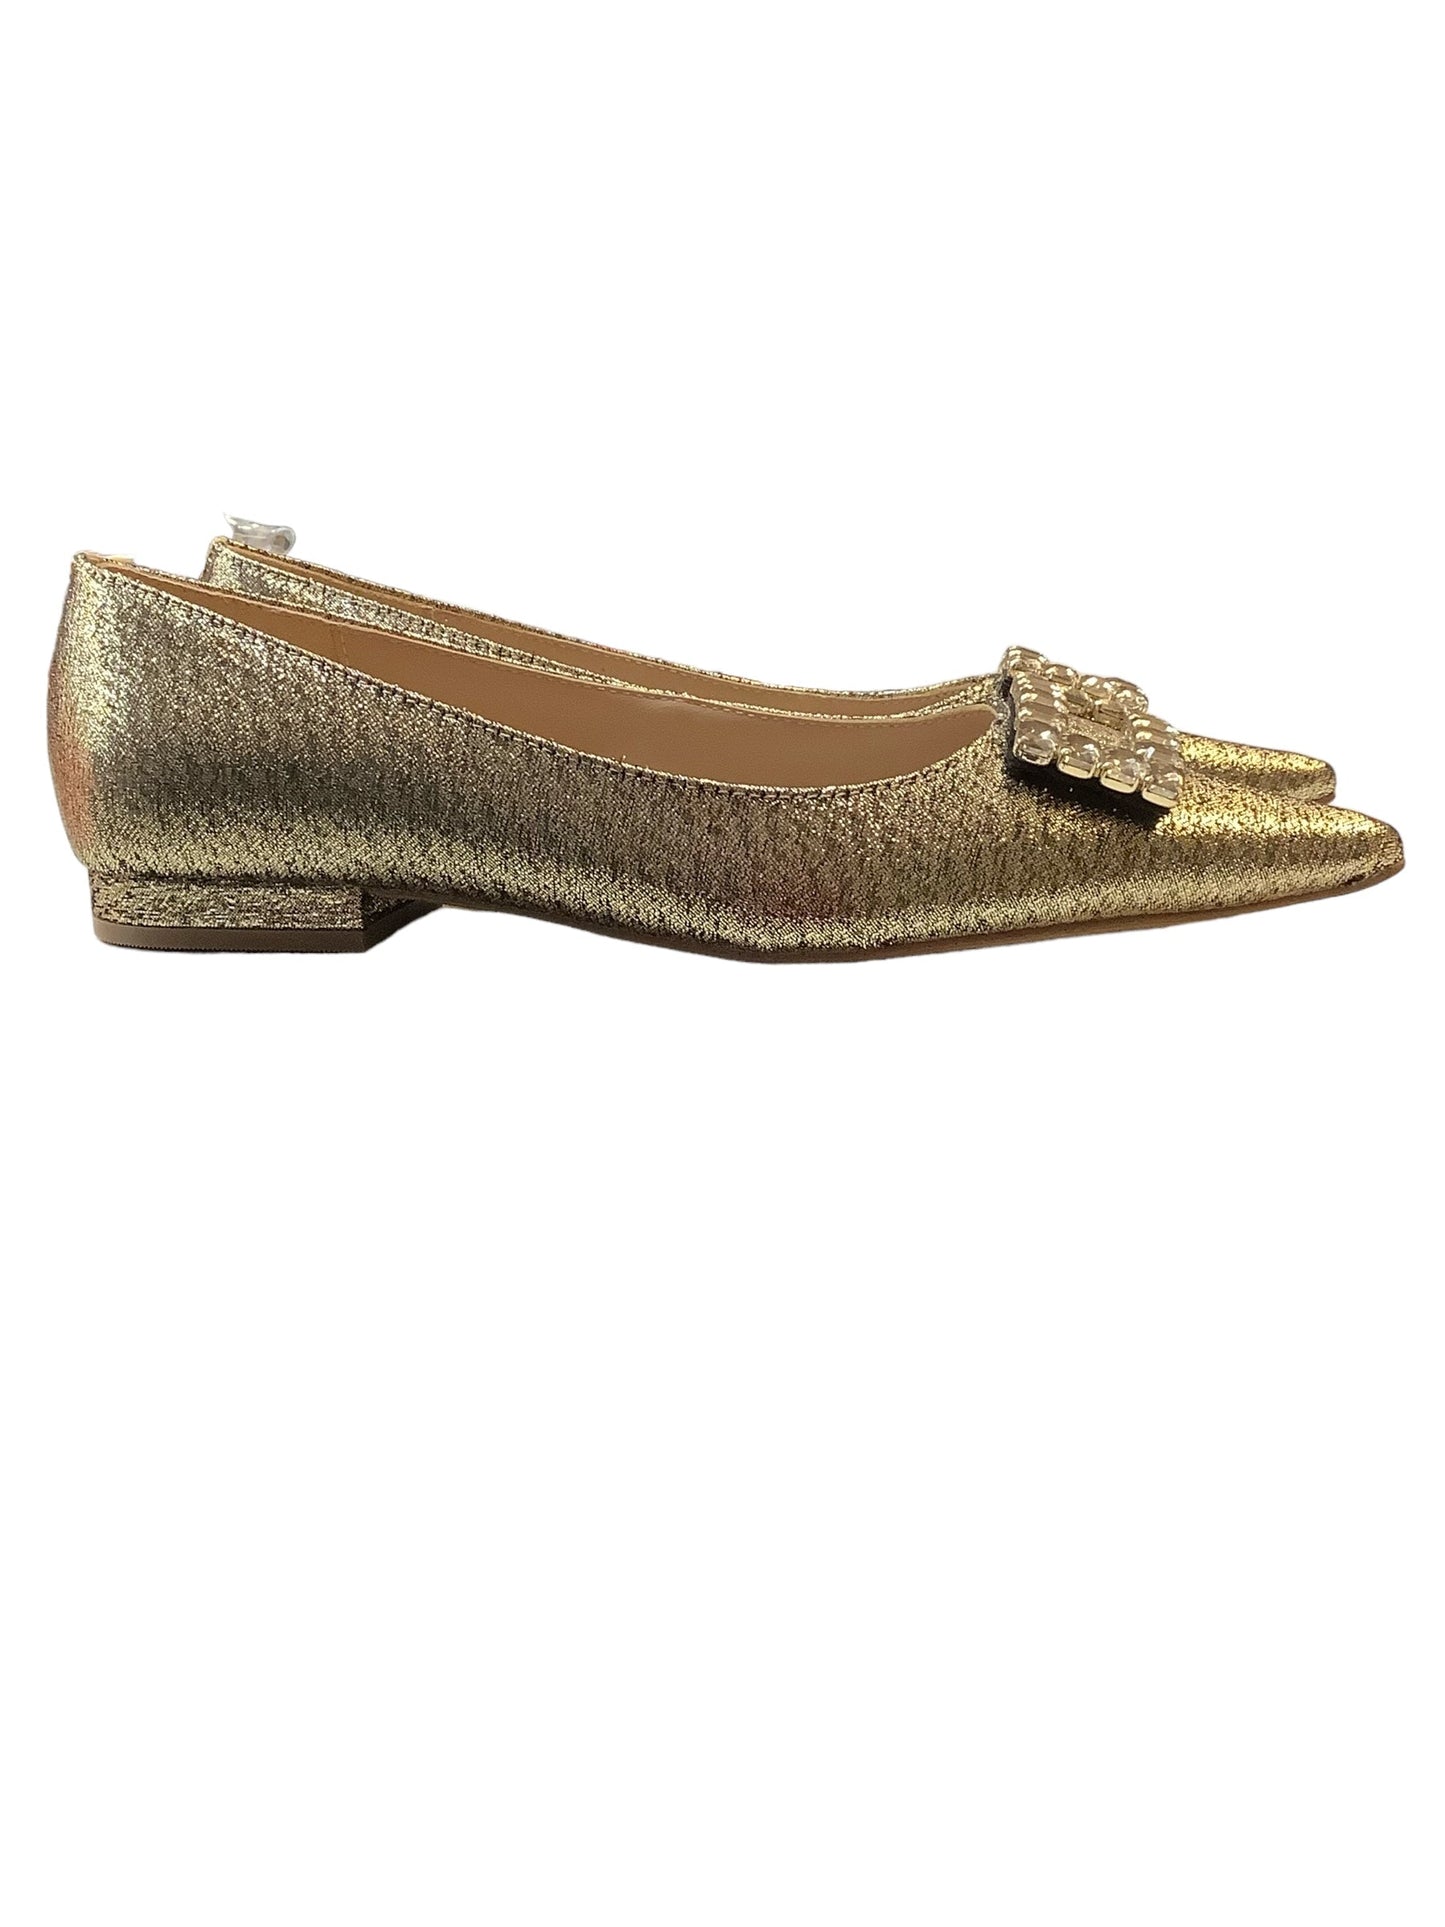 Gold Shoes Flats Boden, Size 7